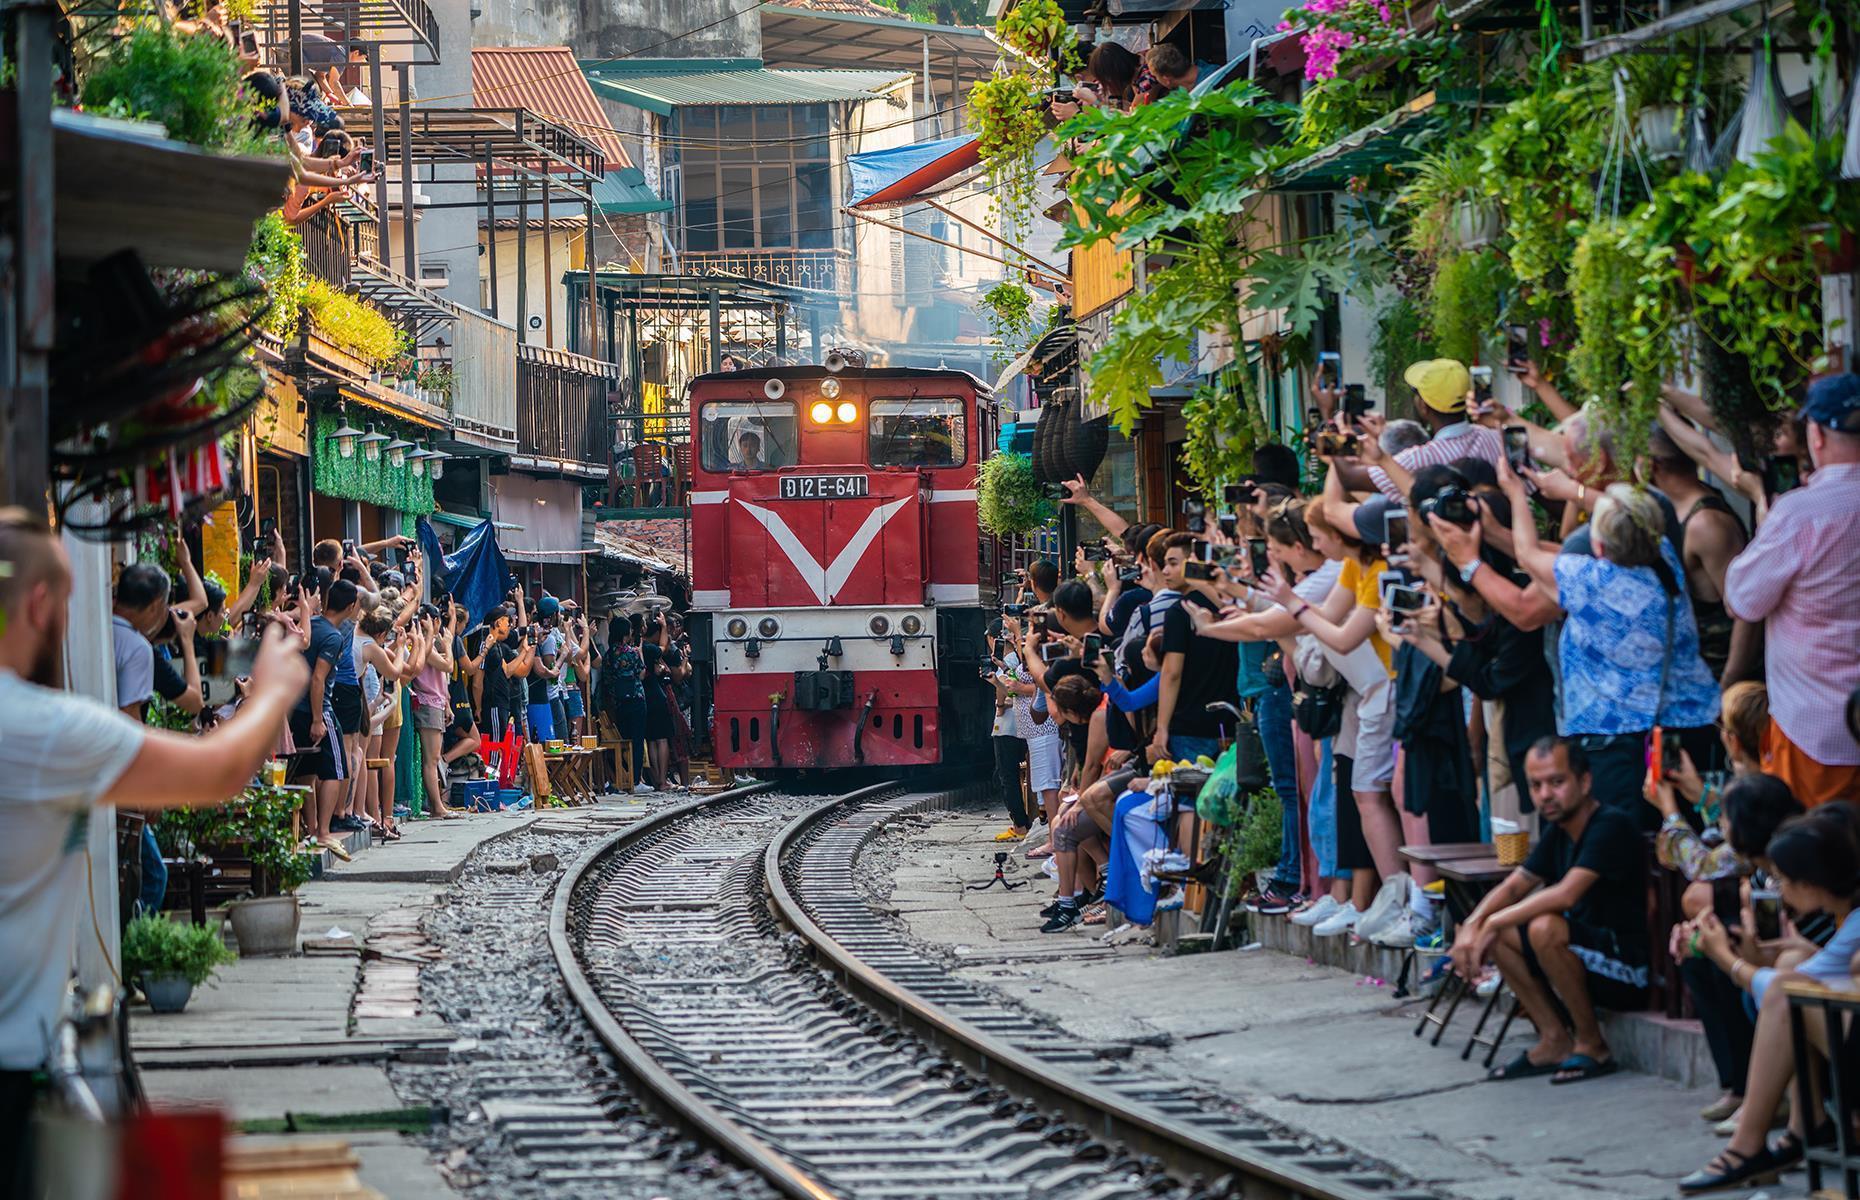 Hanoi has long attracted tourists, who come for the frenetic city life and use it as a gateway to discover northern Vietnam. Until recently, Train Street was one of the Vietnamese capital’s most iconic attractions – the narrow street featured cafés and shops that spilled out onto a railway line, some situated only five feet (1.5m) from the tracks.